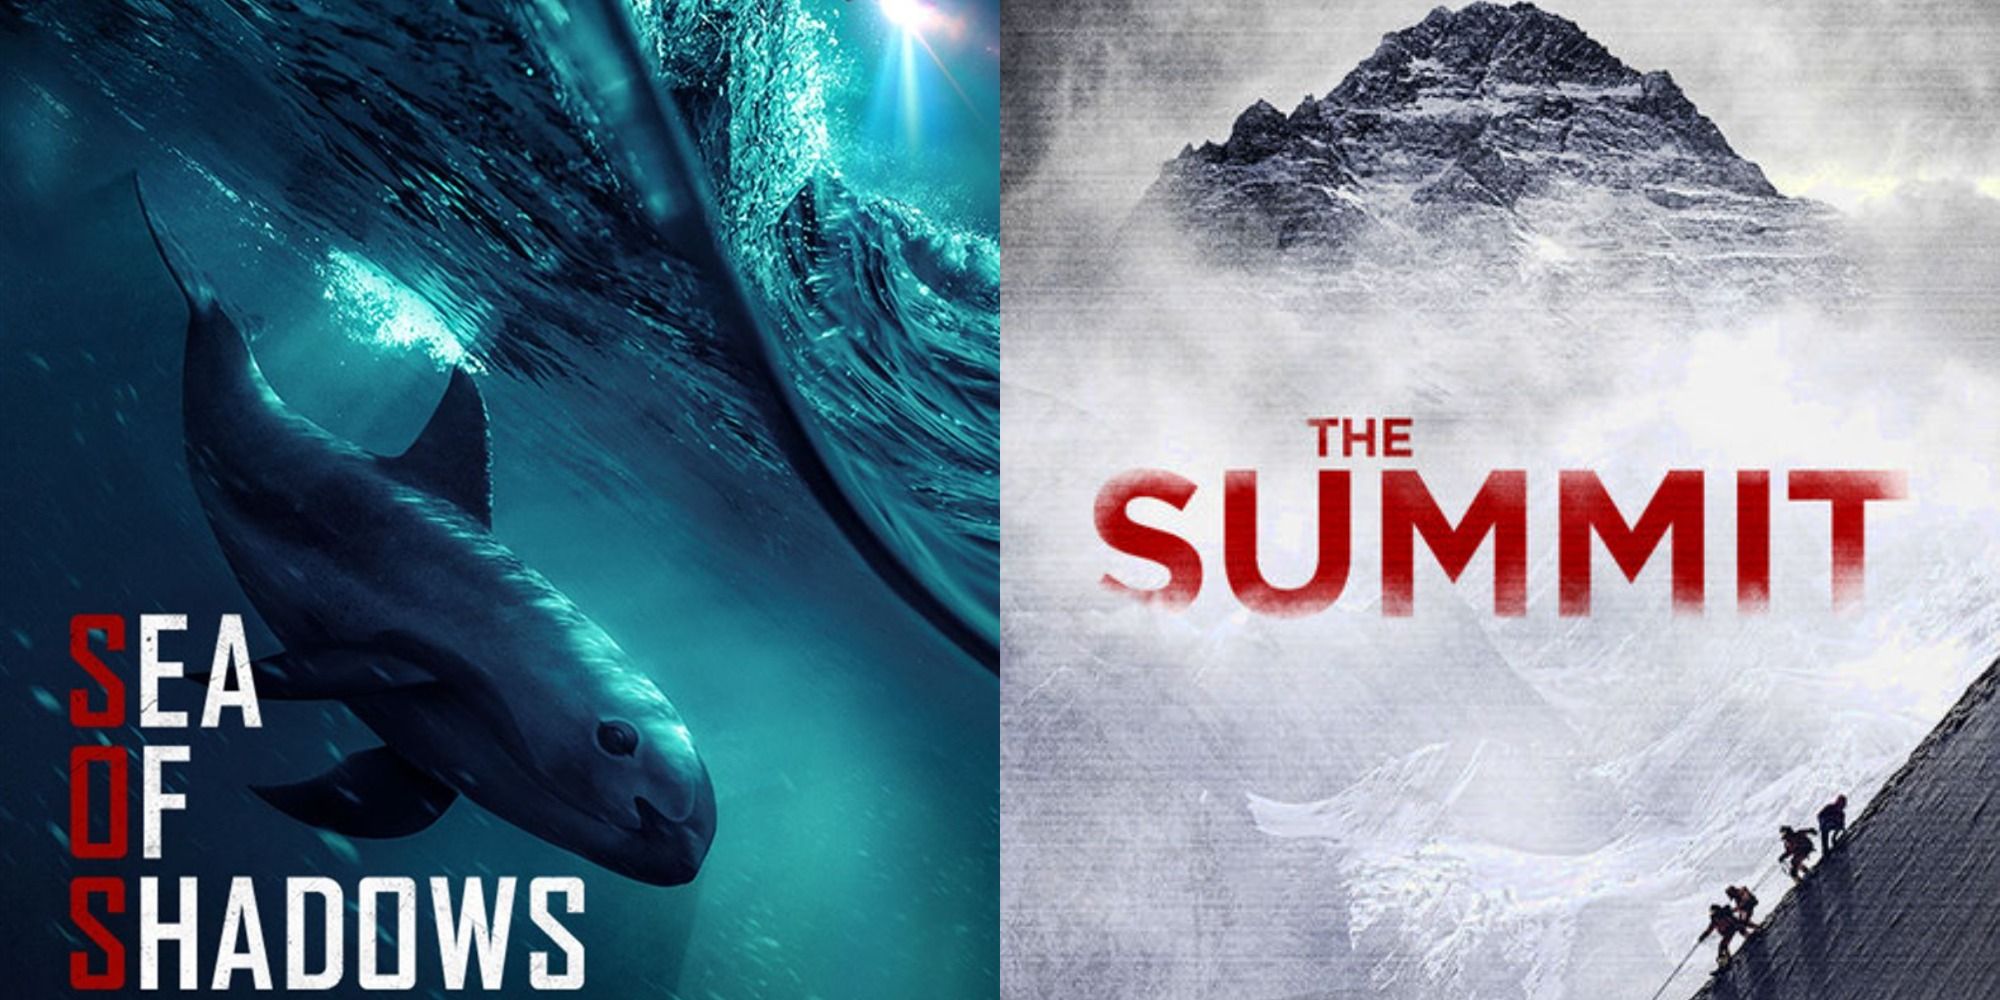 Split image showing posters for the documentaries Sea of Shadows and The Summit